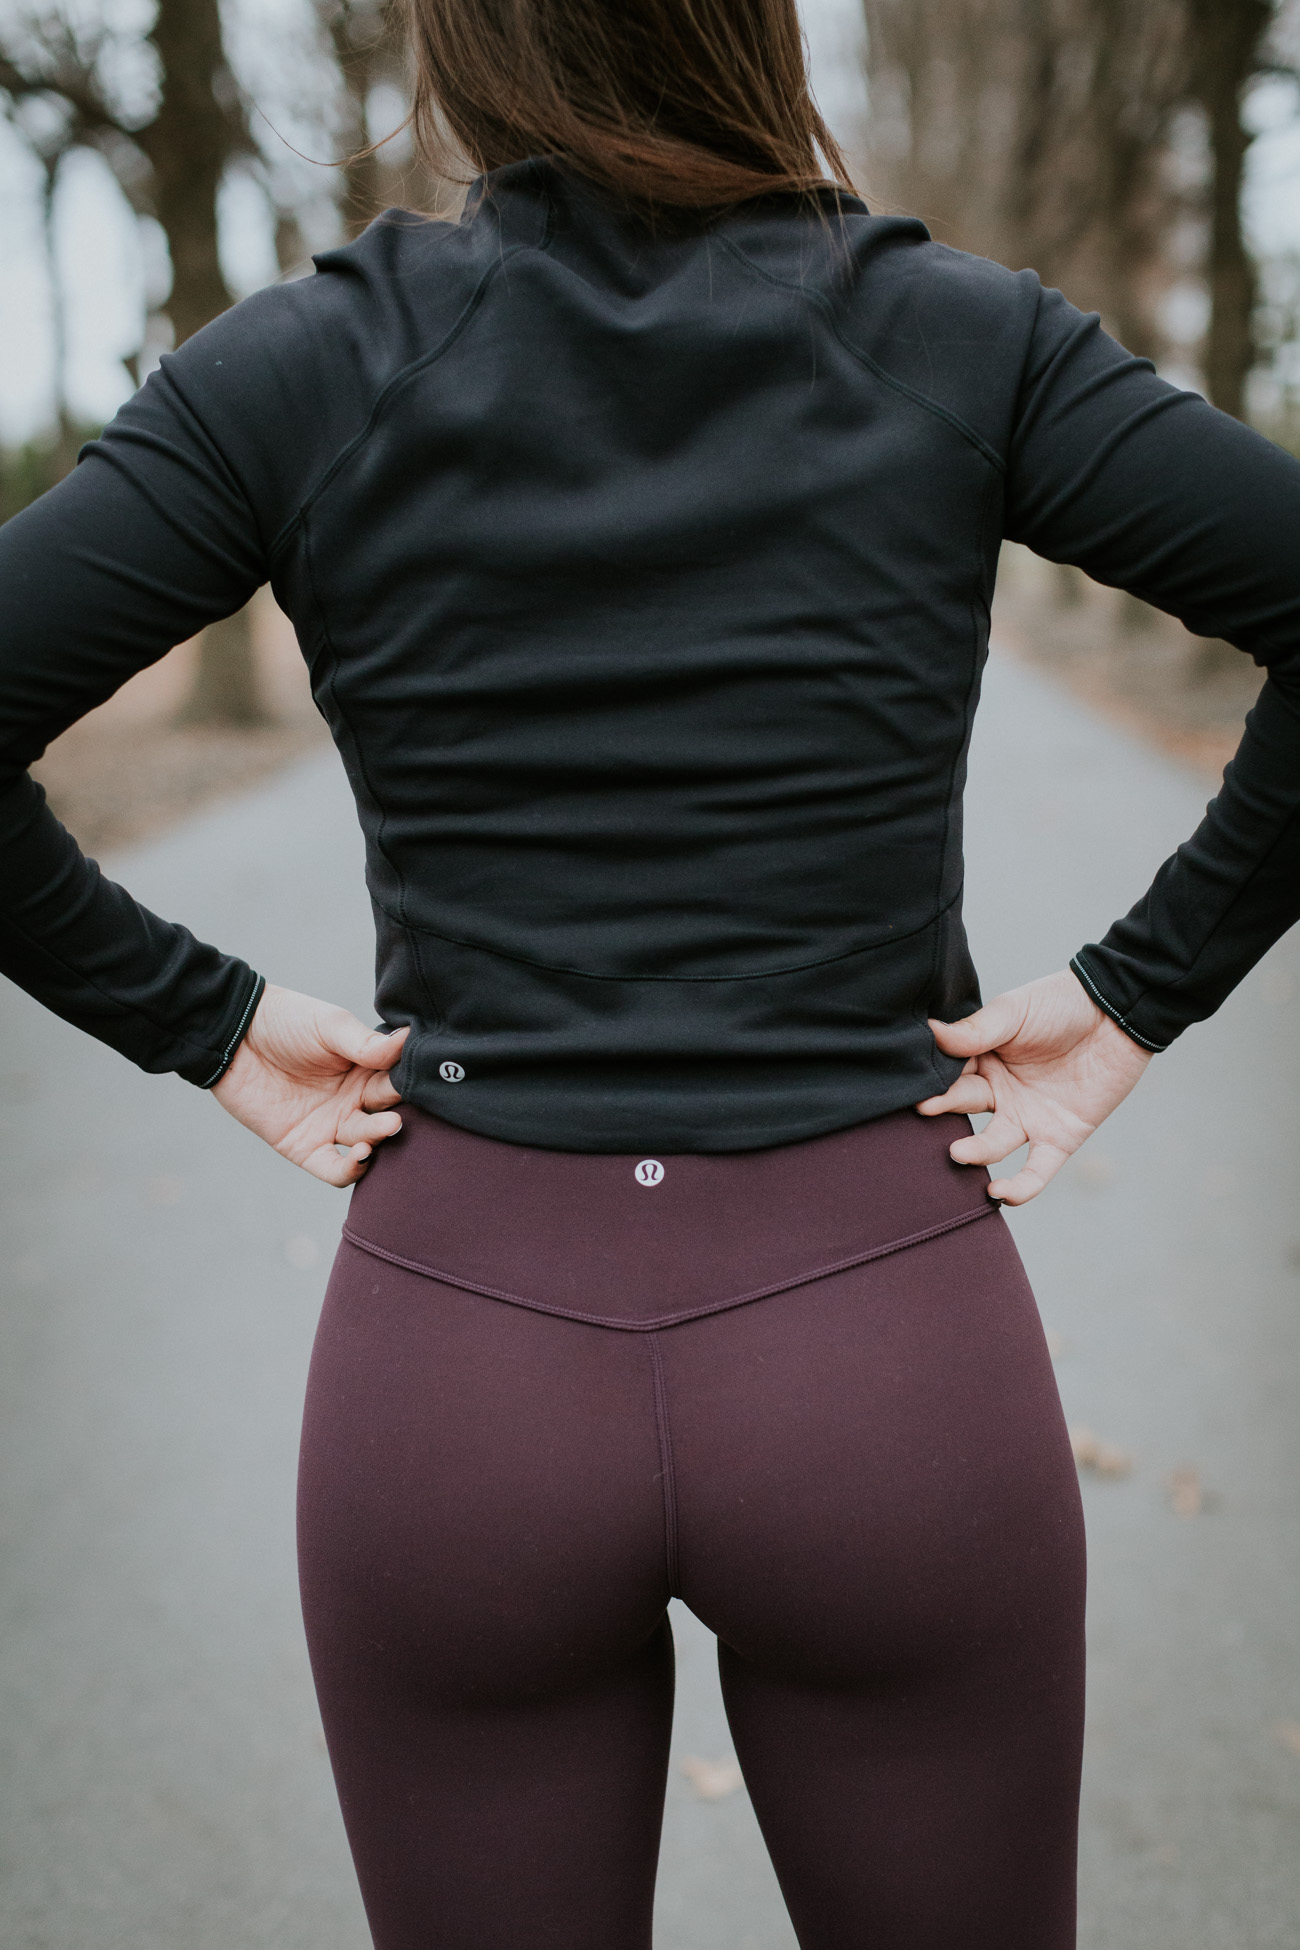 lululemon crop pullover, lululemon align pant, align crops, nike air presto sneaker, black crop pullover, crop long sleeve, athleisure outfit, a southern drawl workouts, winter activewear, fall activewear, lululemon high times pant, lululemon wunder under pant, lululemon activewear, athleisure, cute activewear outfit, a southern drawl workouts, weekly workout routine, weekly workouts, weekly exercises, polar a360 watch, cute activewear, cute workout outfit, running routine, girl gains, fitness inspiration, fitspo, athleisure, nike athleisure outfit // grace wainwright a southern drawl